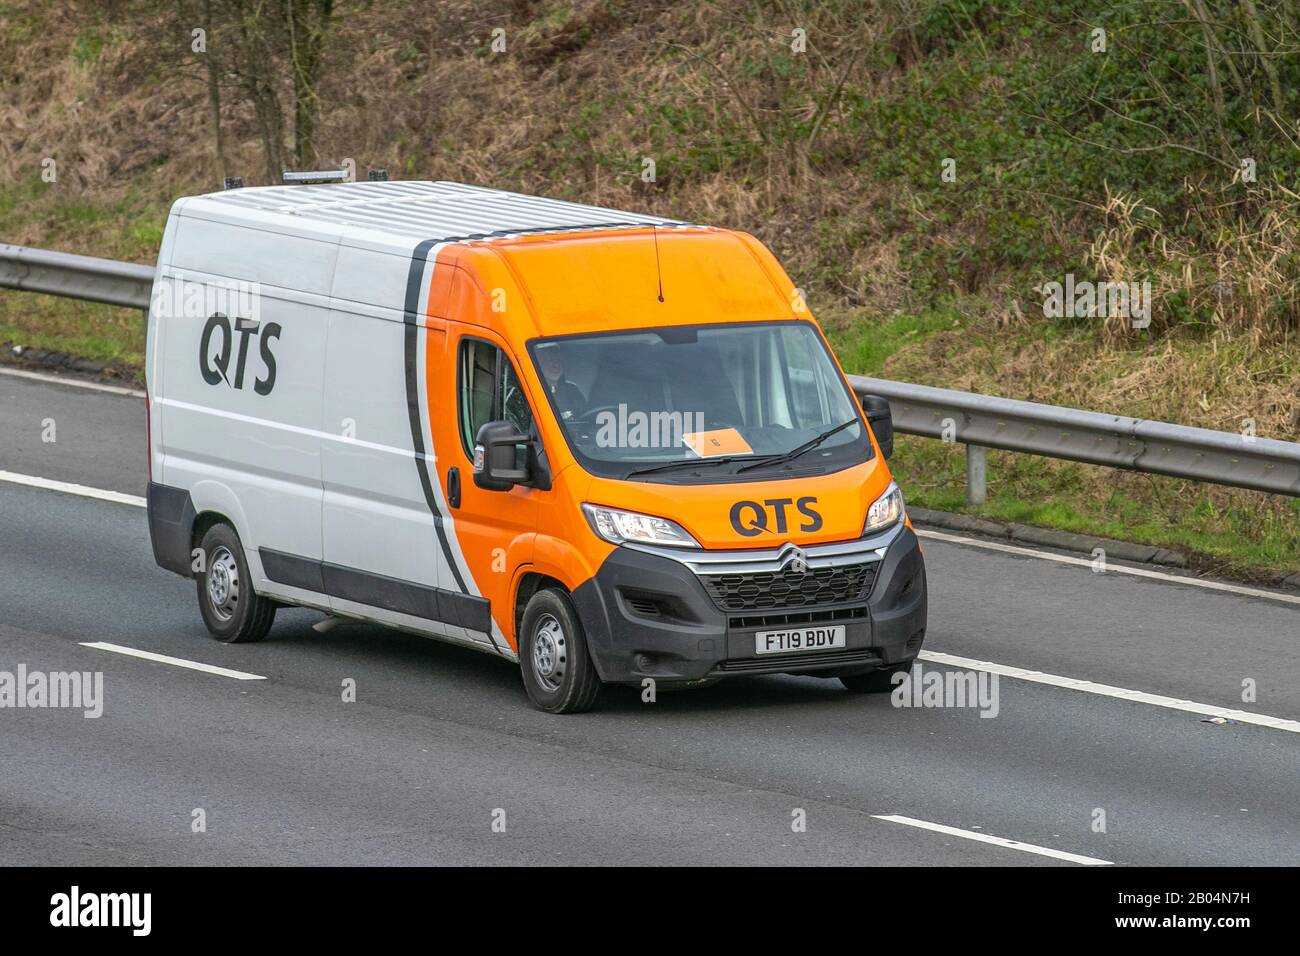 QTS Group van; UK's leading Rail Contractor; Haulage delivery trucks, HGV lorry, transportation, truck, vehicle, transport industry, M61 at Manchester, UK Stock Photo